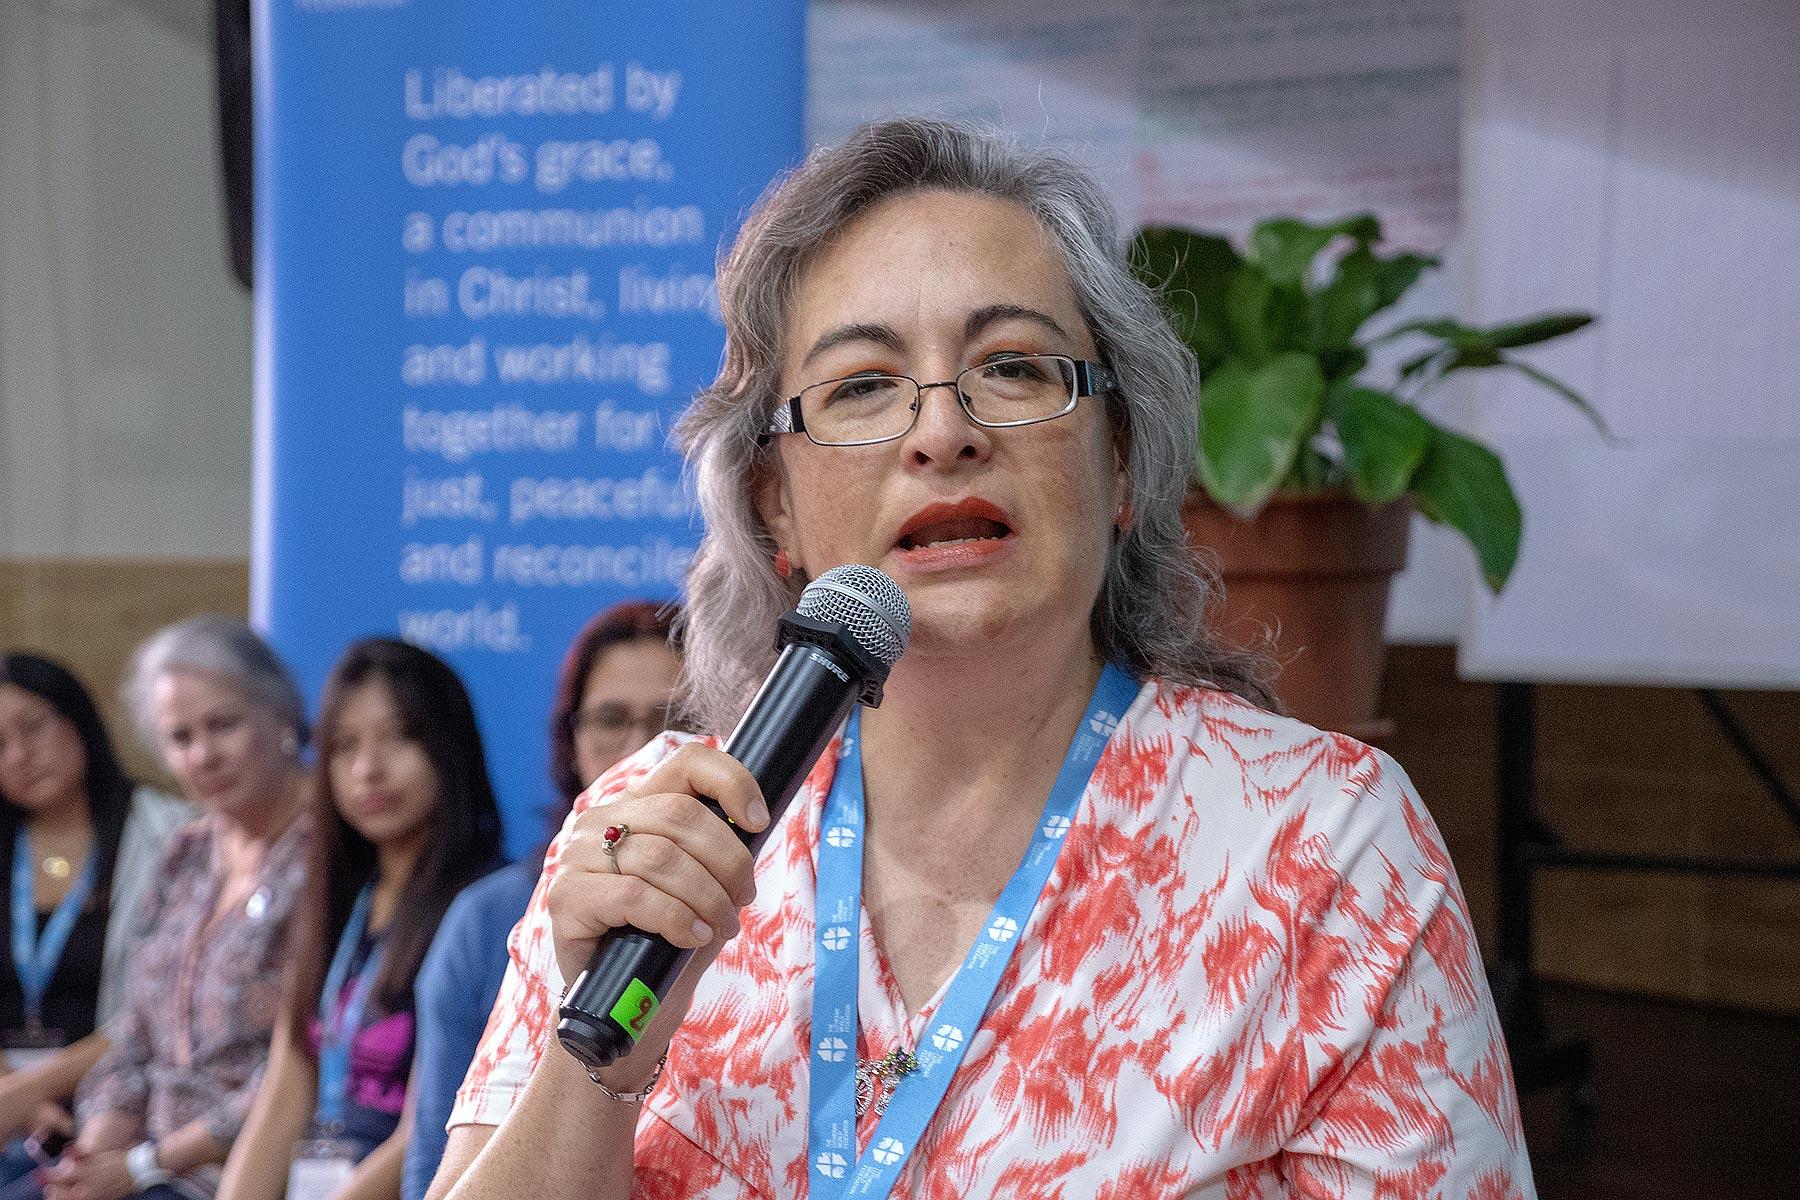 Rev. Angela del Consuelo Trejo Haager, from the Mexican Lutheran Church at the Latin America and the Caribbean & North America leadership meeting in Peru. Photo: LWF/A. Danielsson